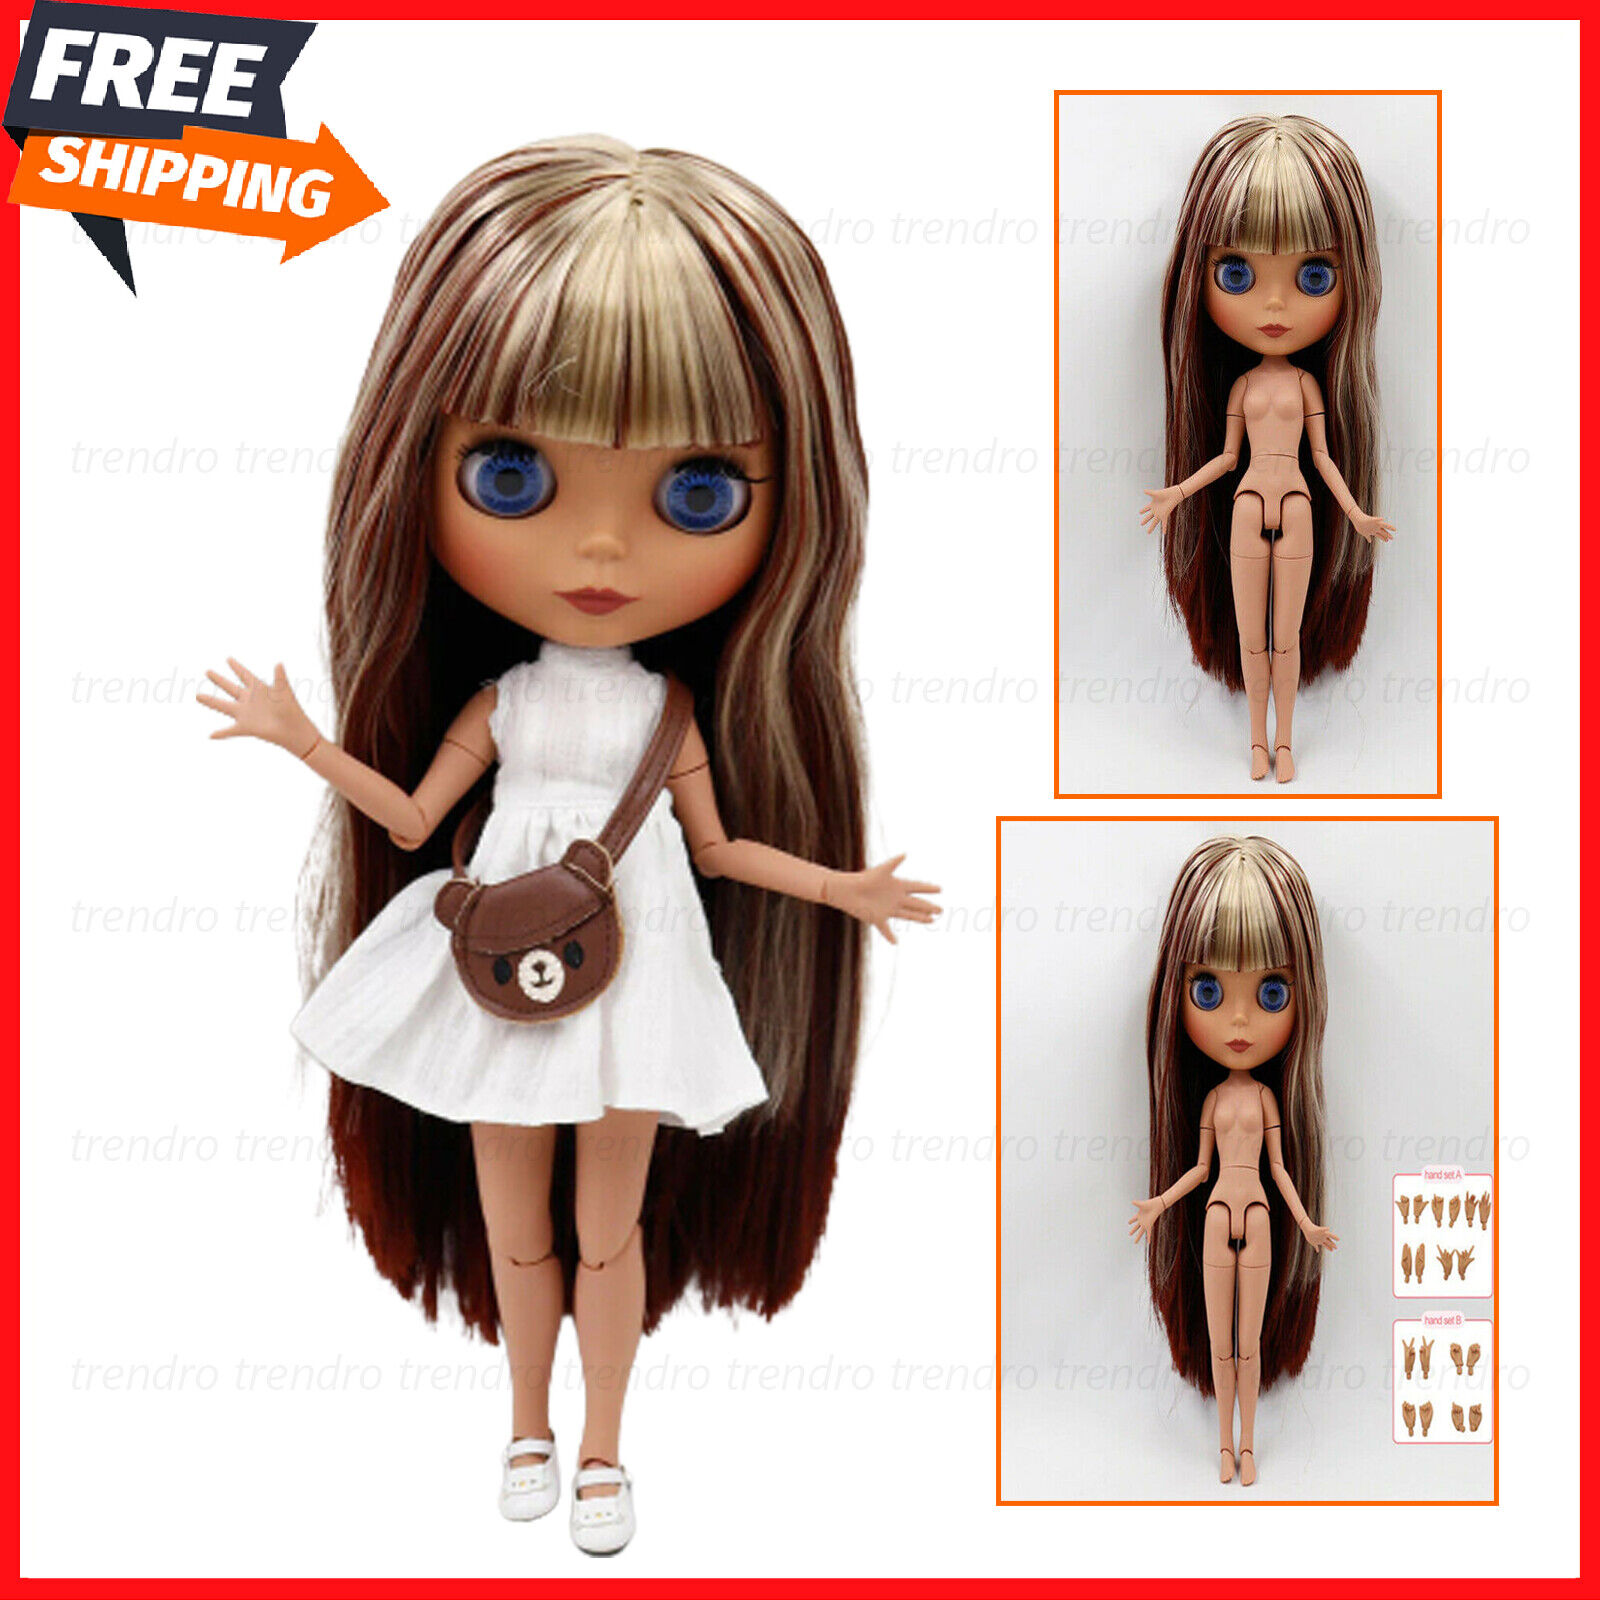 12" Jointed Body Blythe Doll Nude Mixed Hair Matte Face Fashion Customized Face 